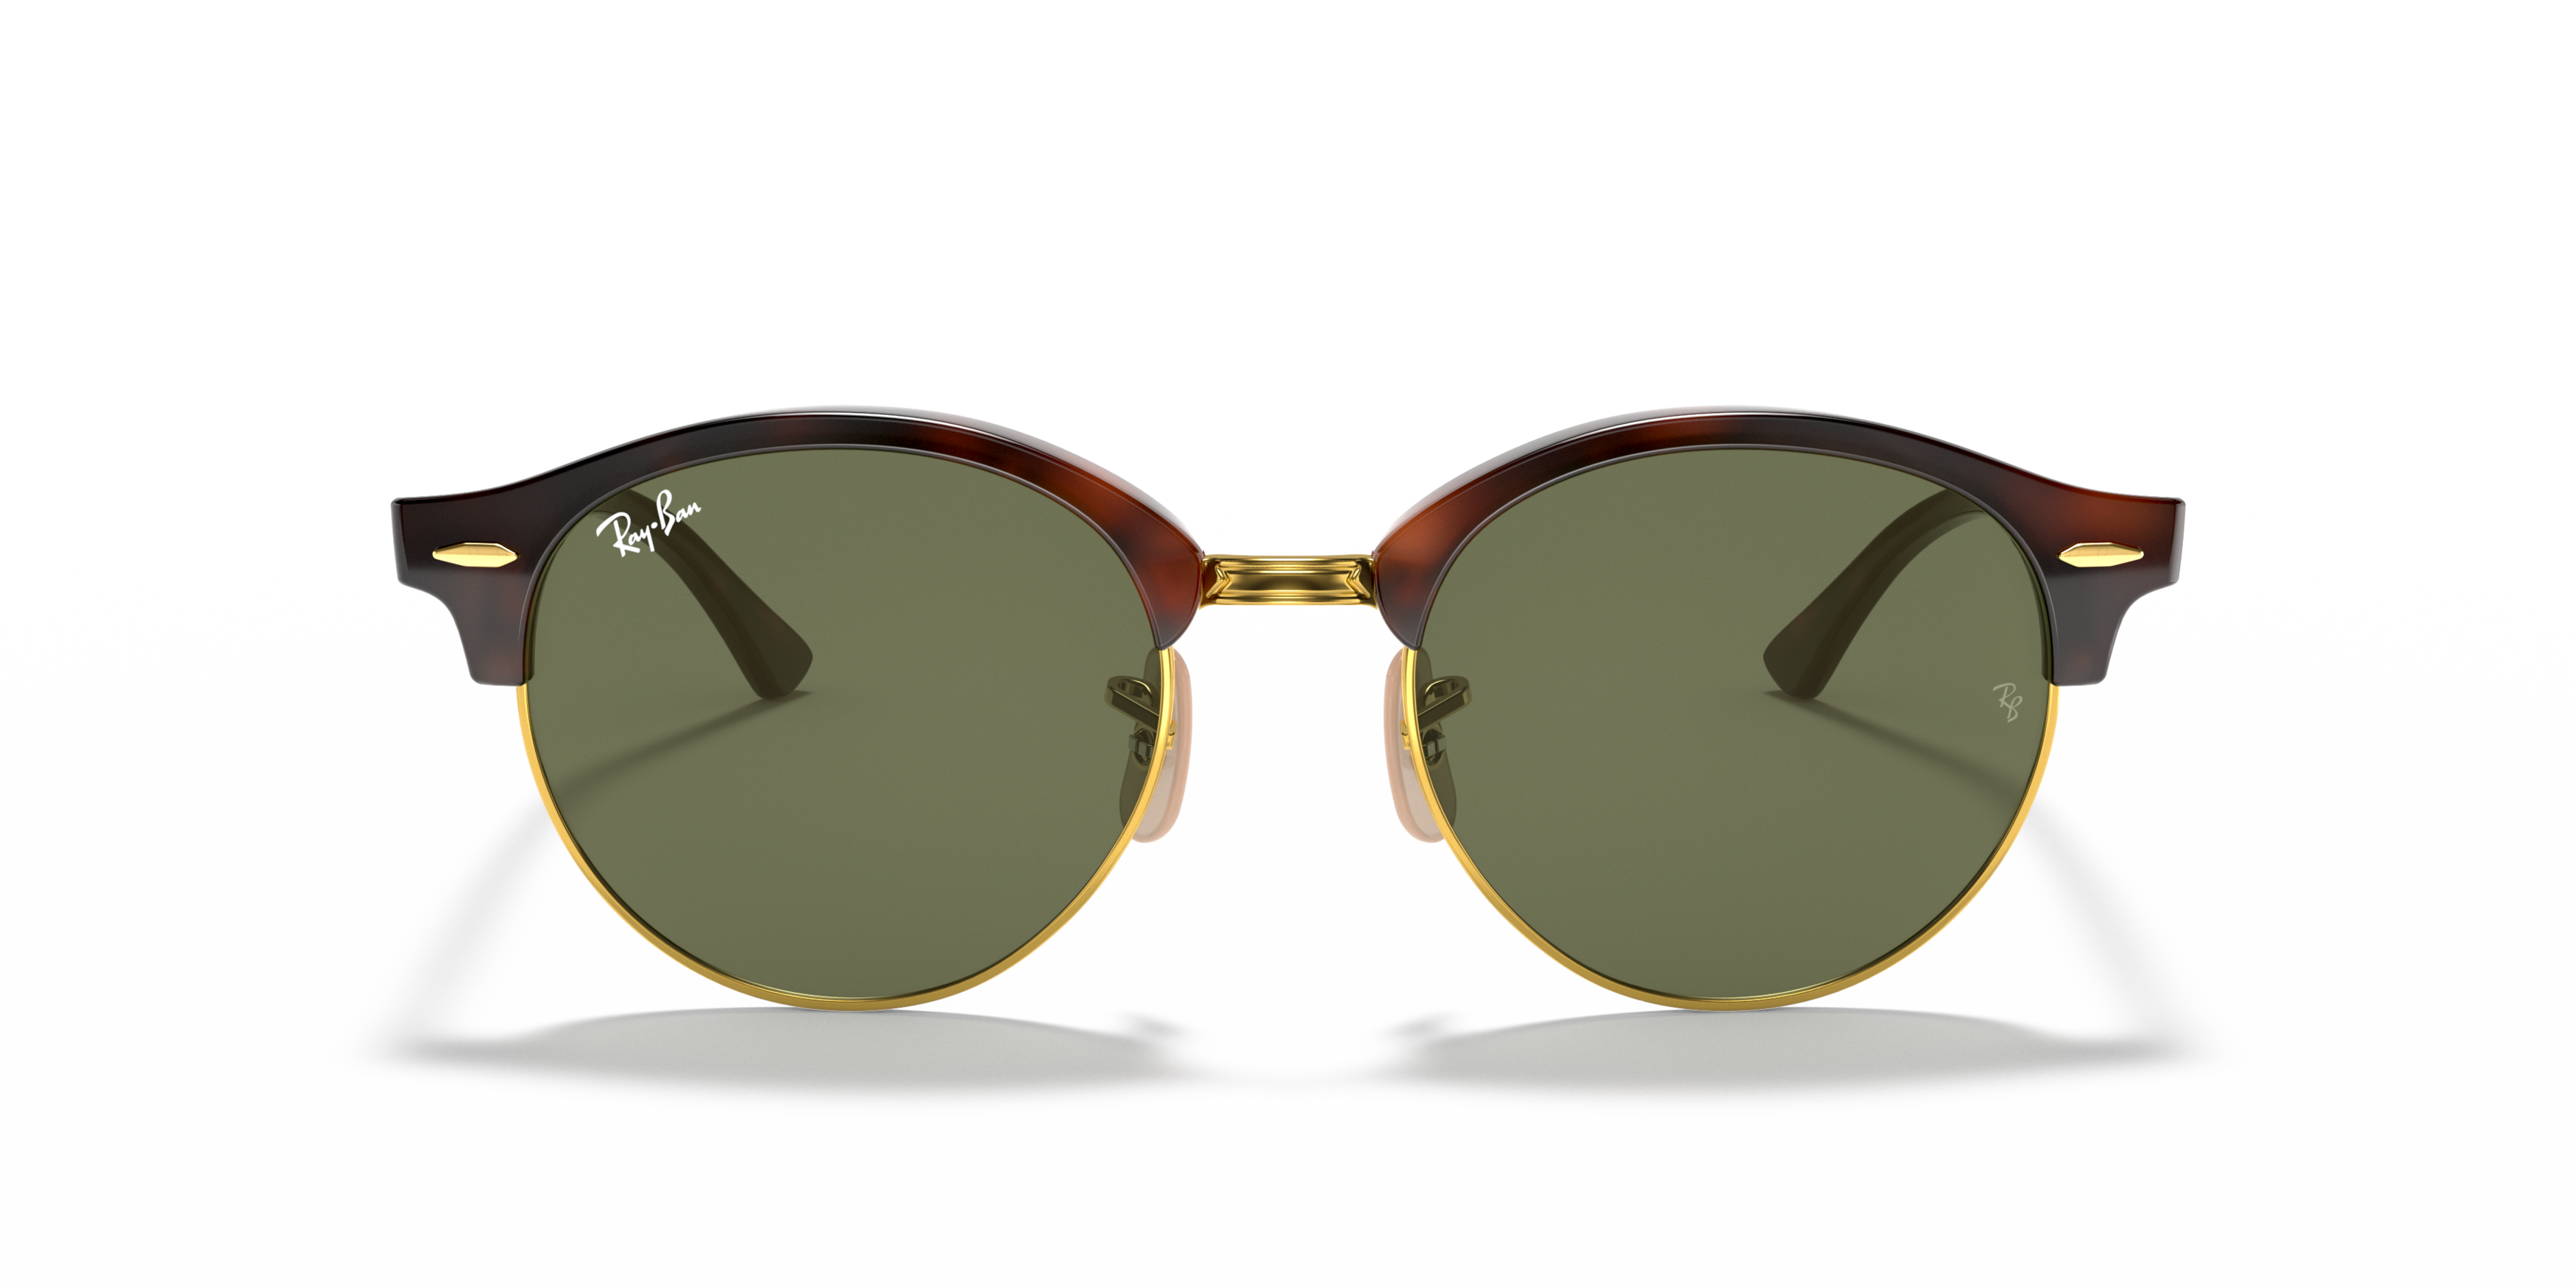 [products.image.front] RAY-BAN RB4246 990